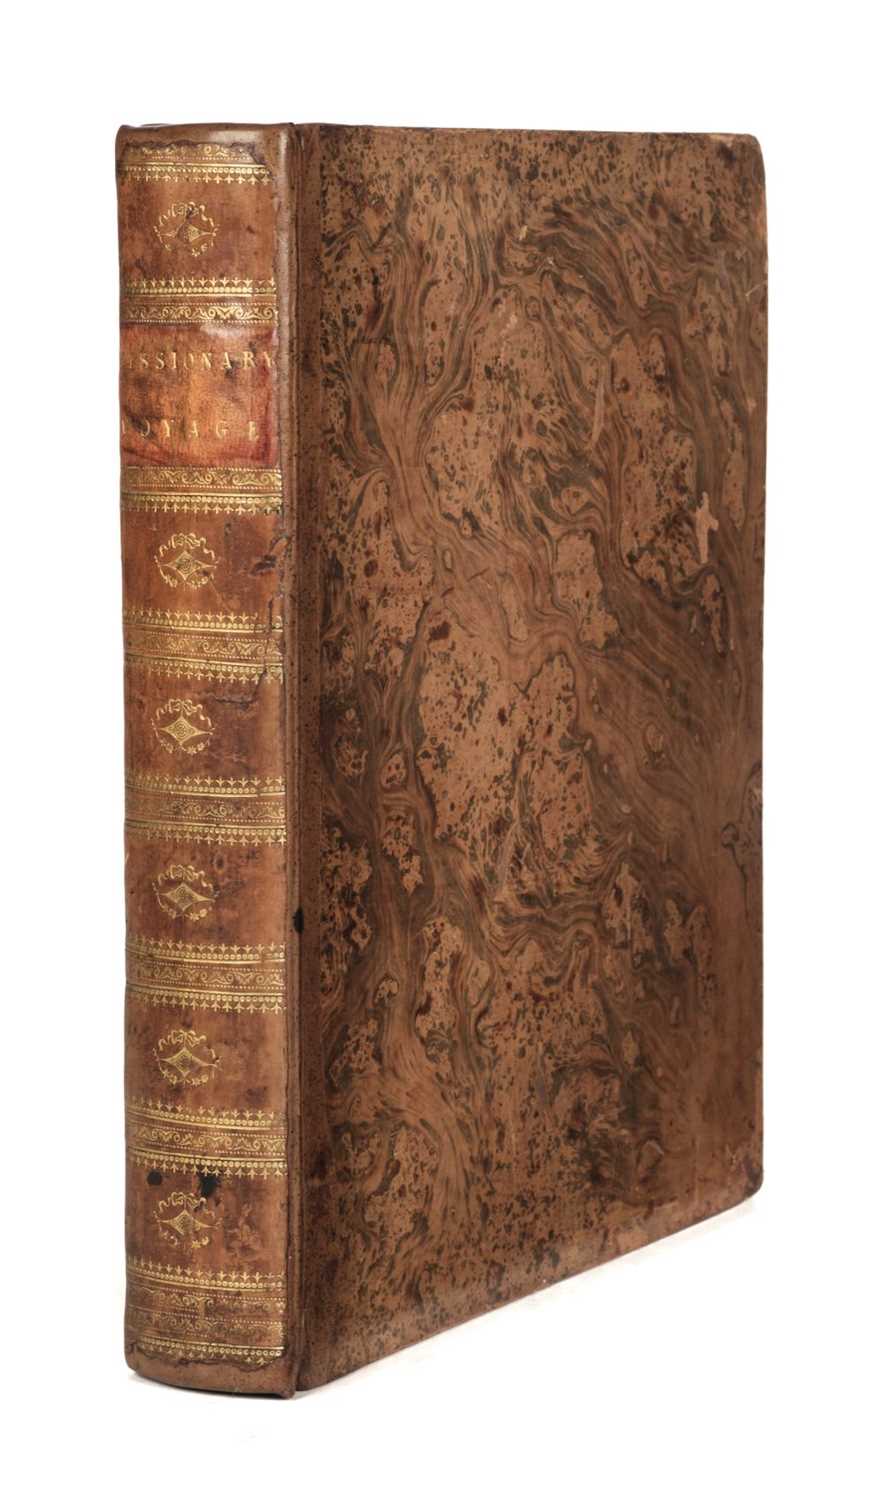 Lot 37 - Wilson (James). A Missionary Voyage to the Southern Pacific Ocean, 1st edition, 1799